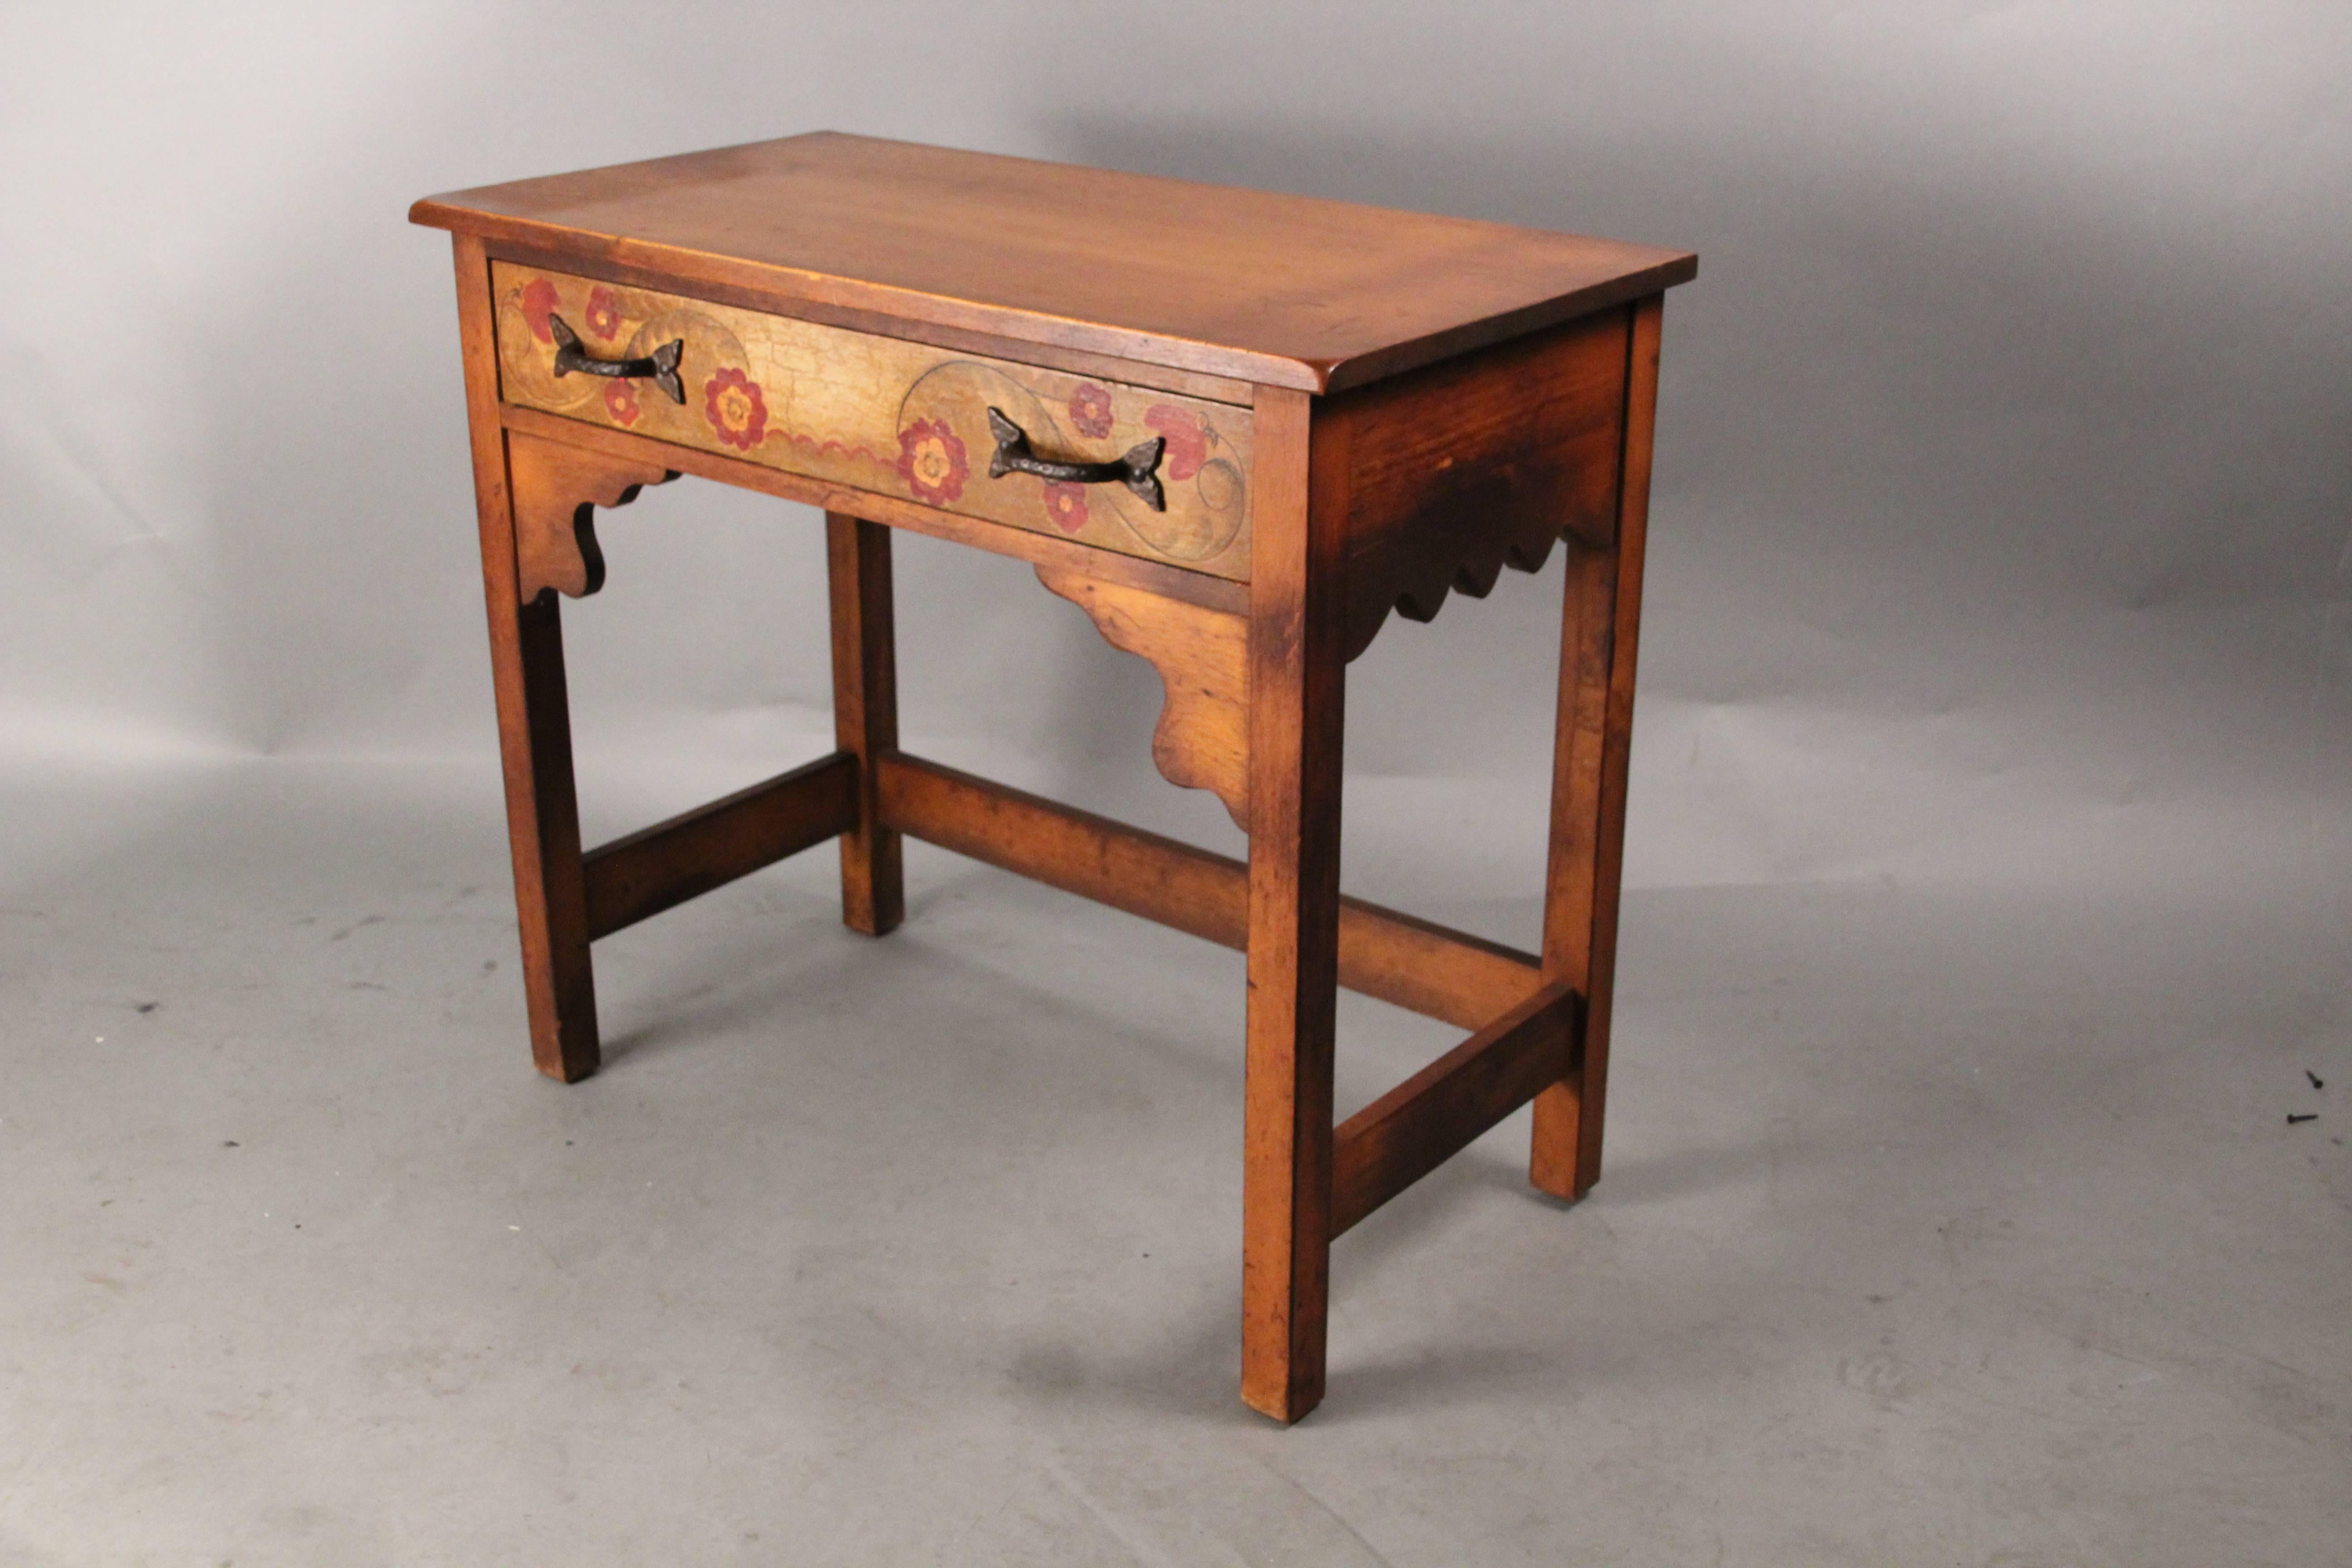 North American Attractive Hand-Painted Rancho Monterey Side Table